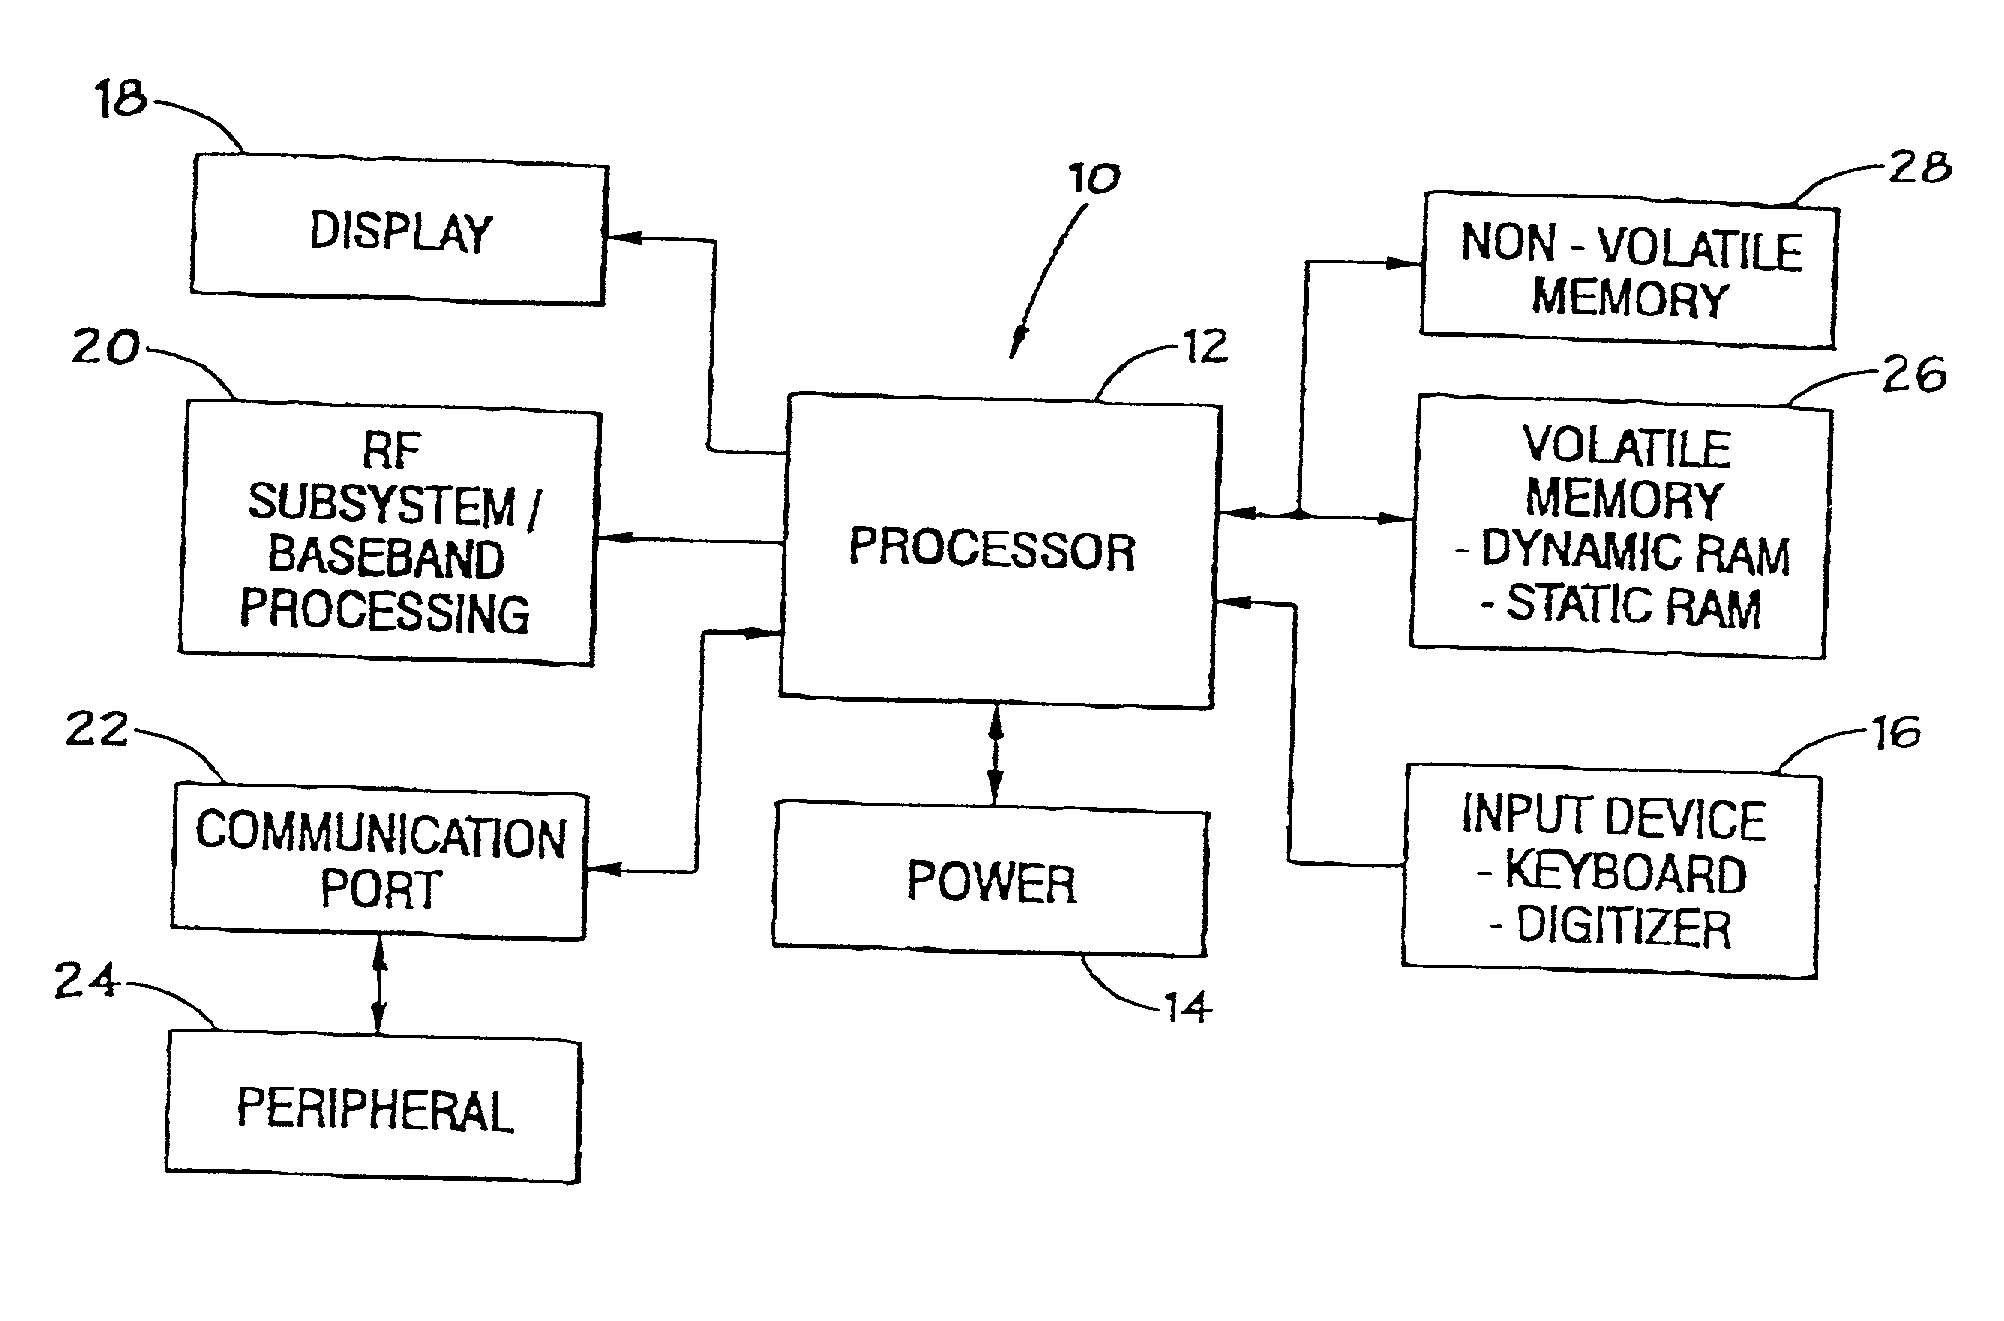 Duty cycle distortion compensation for the data output of a memory device